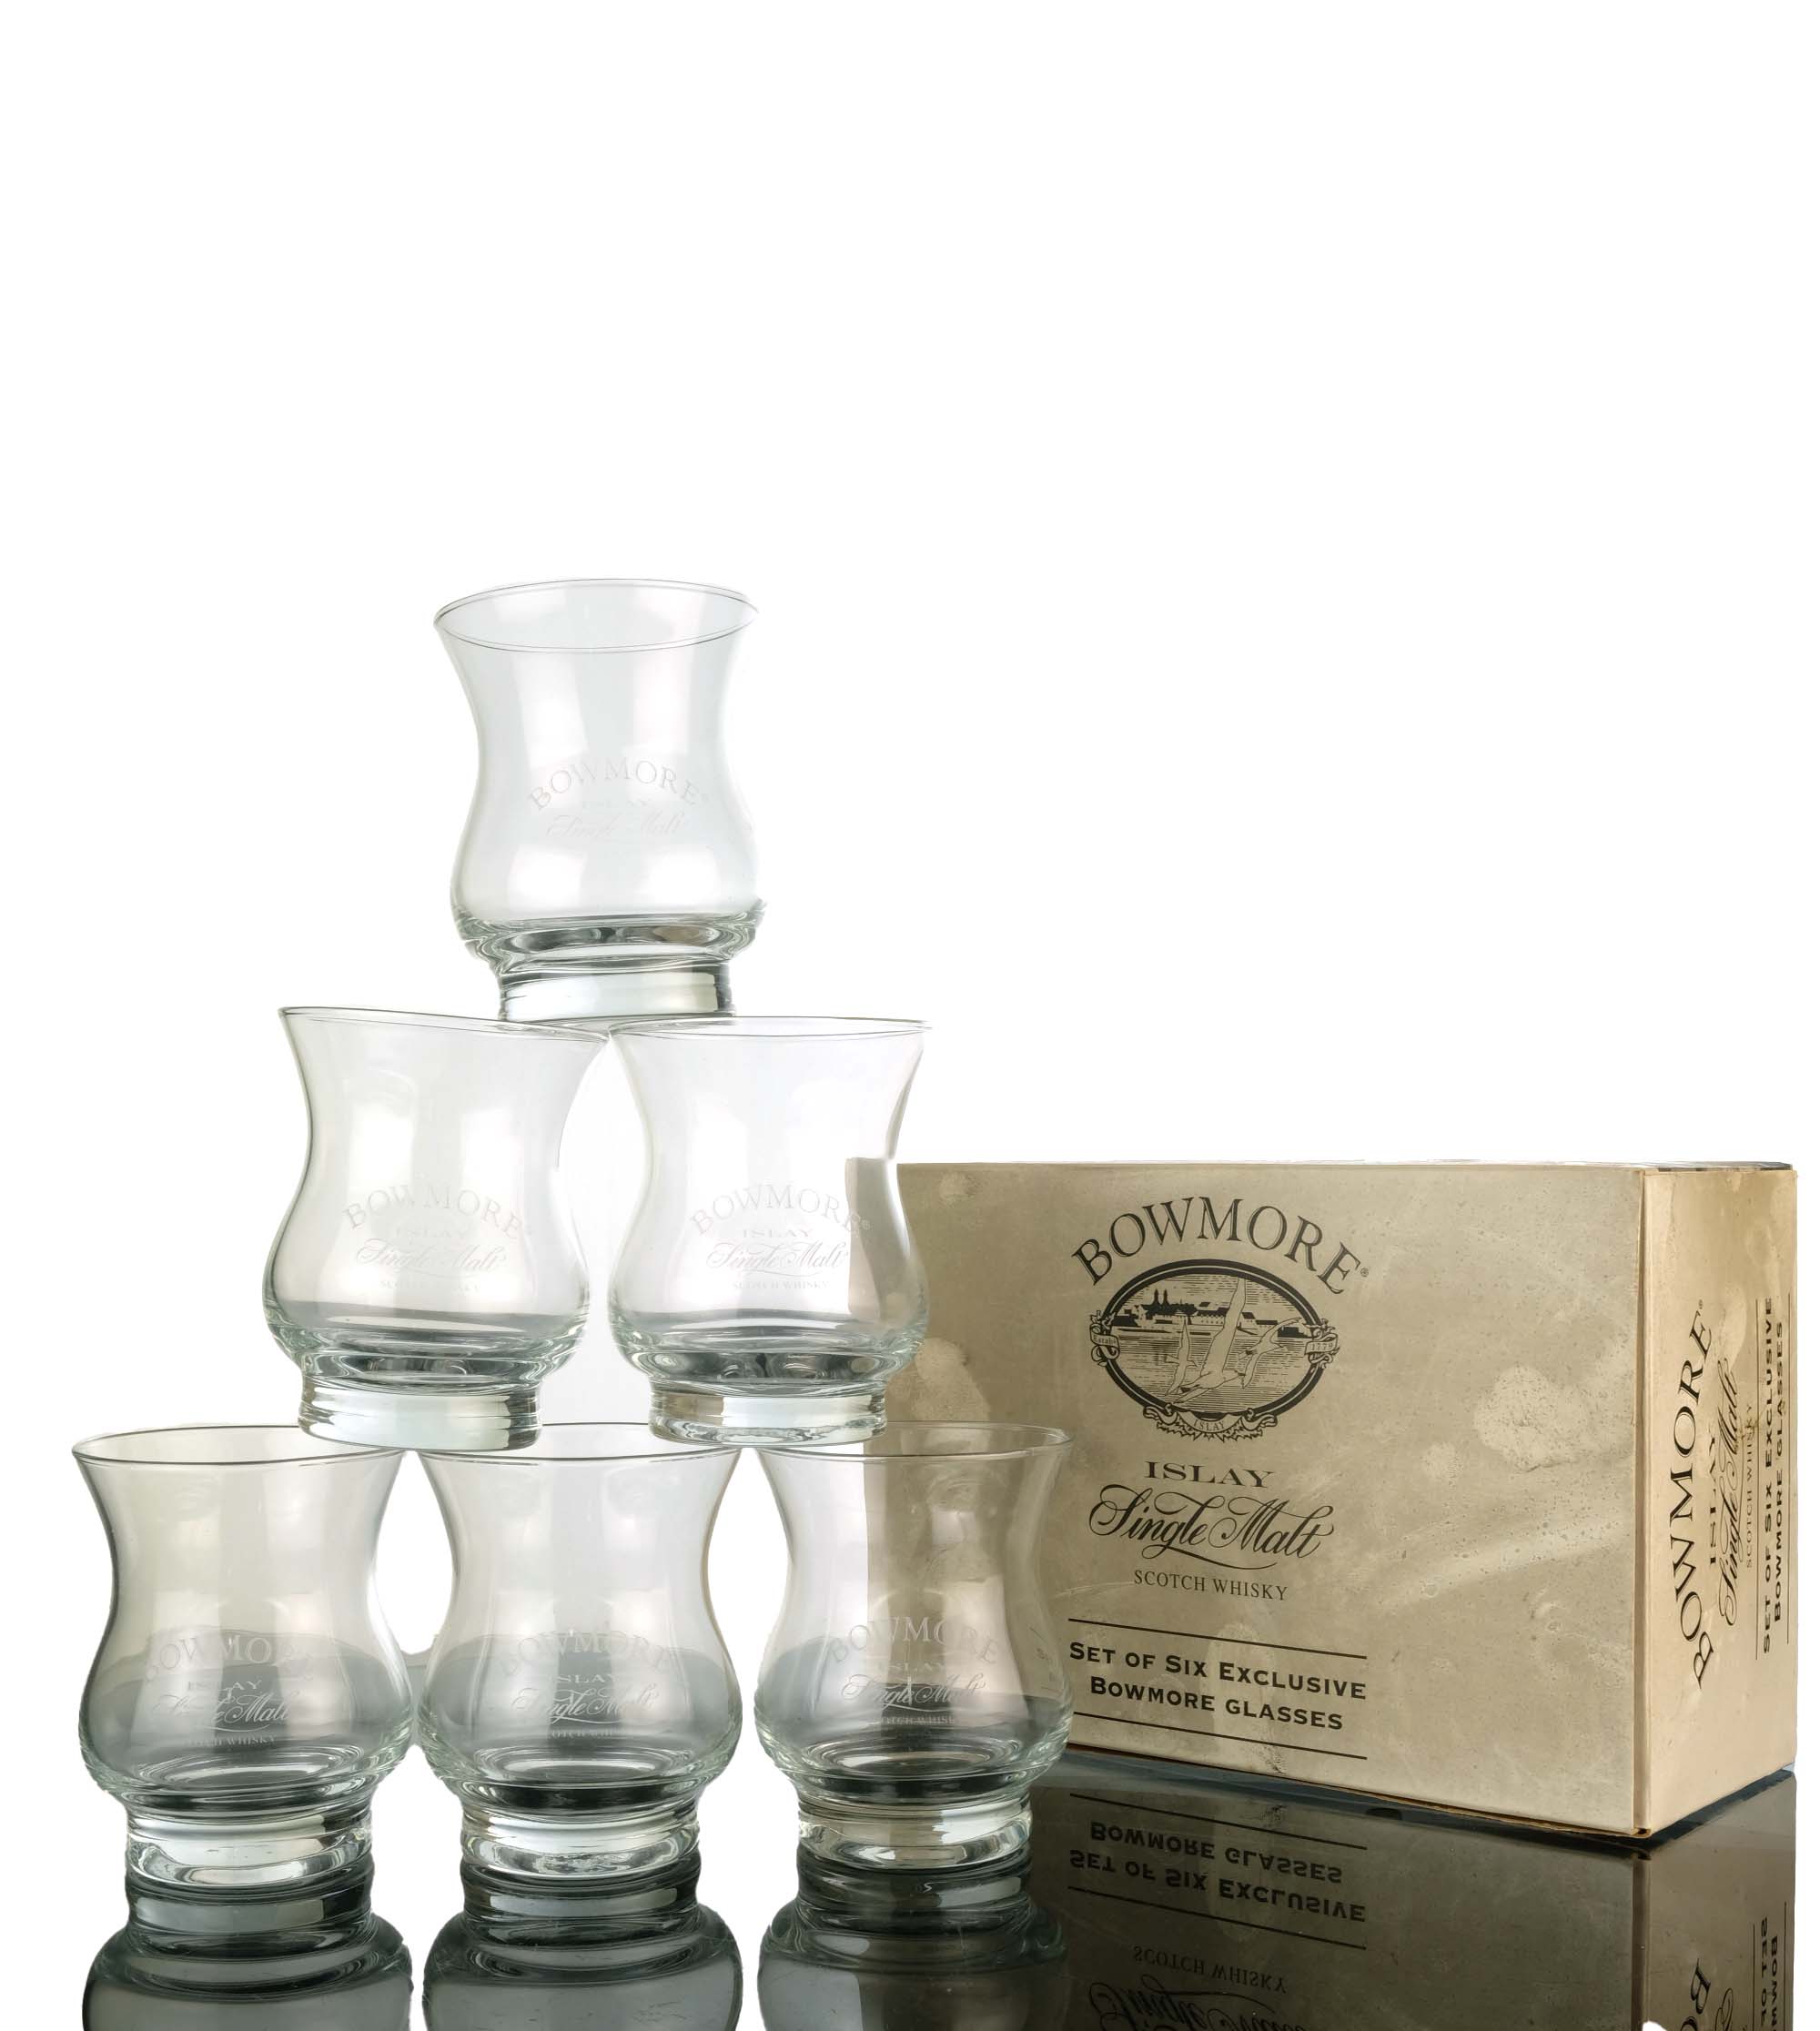 Set Of Six Exclusive Bowmore Glasses.